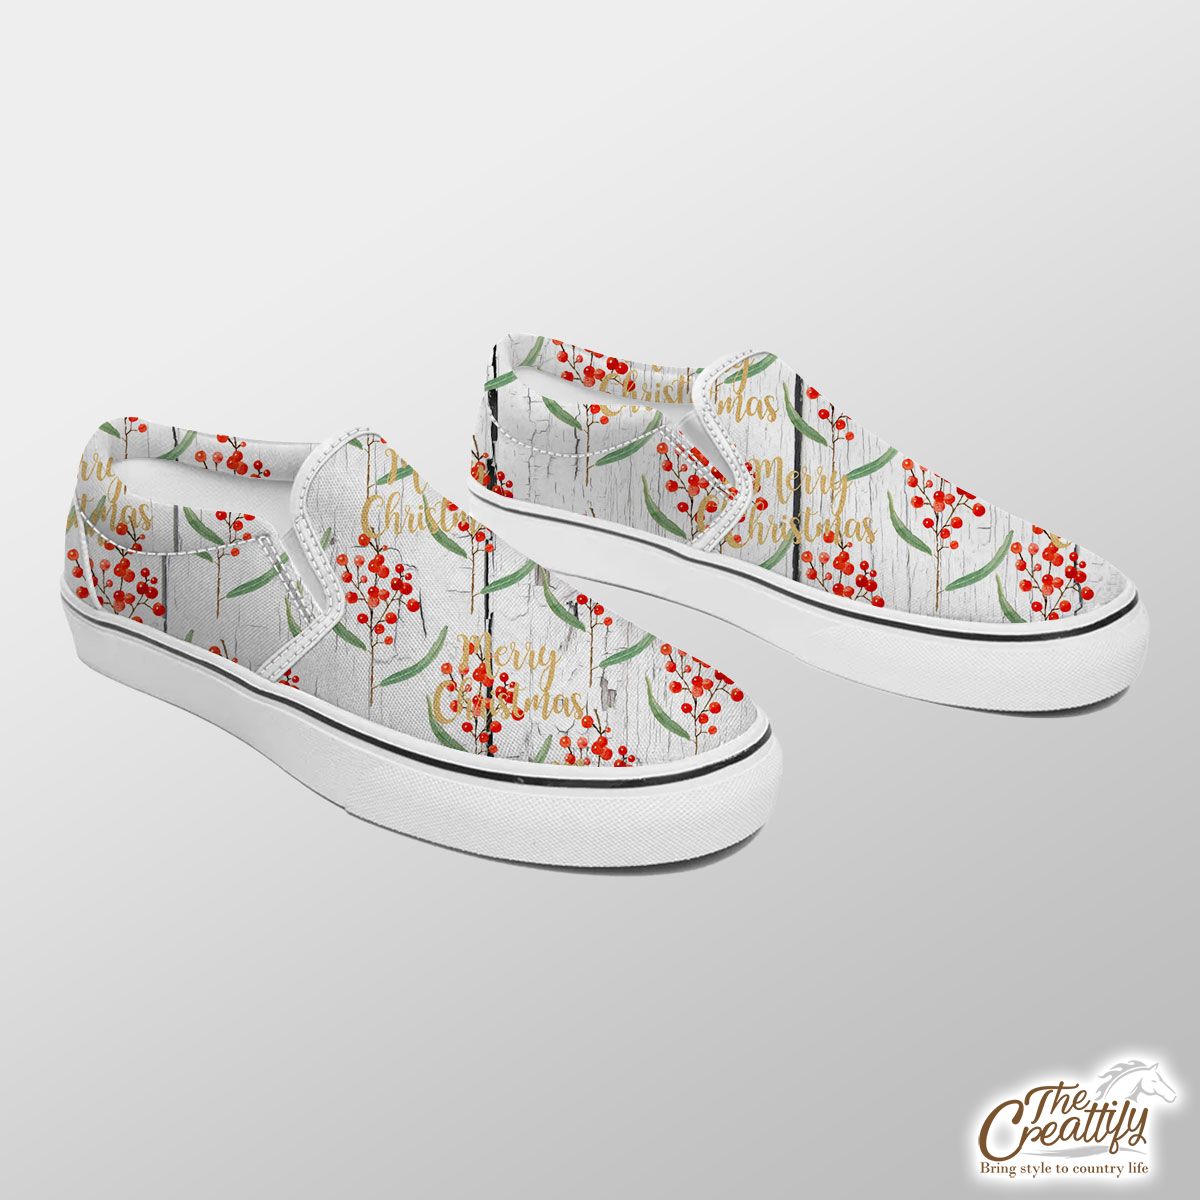 Red Berries With Merry Christmas Wishes Slip On Sneakers